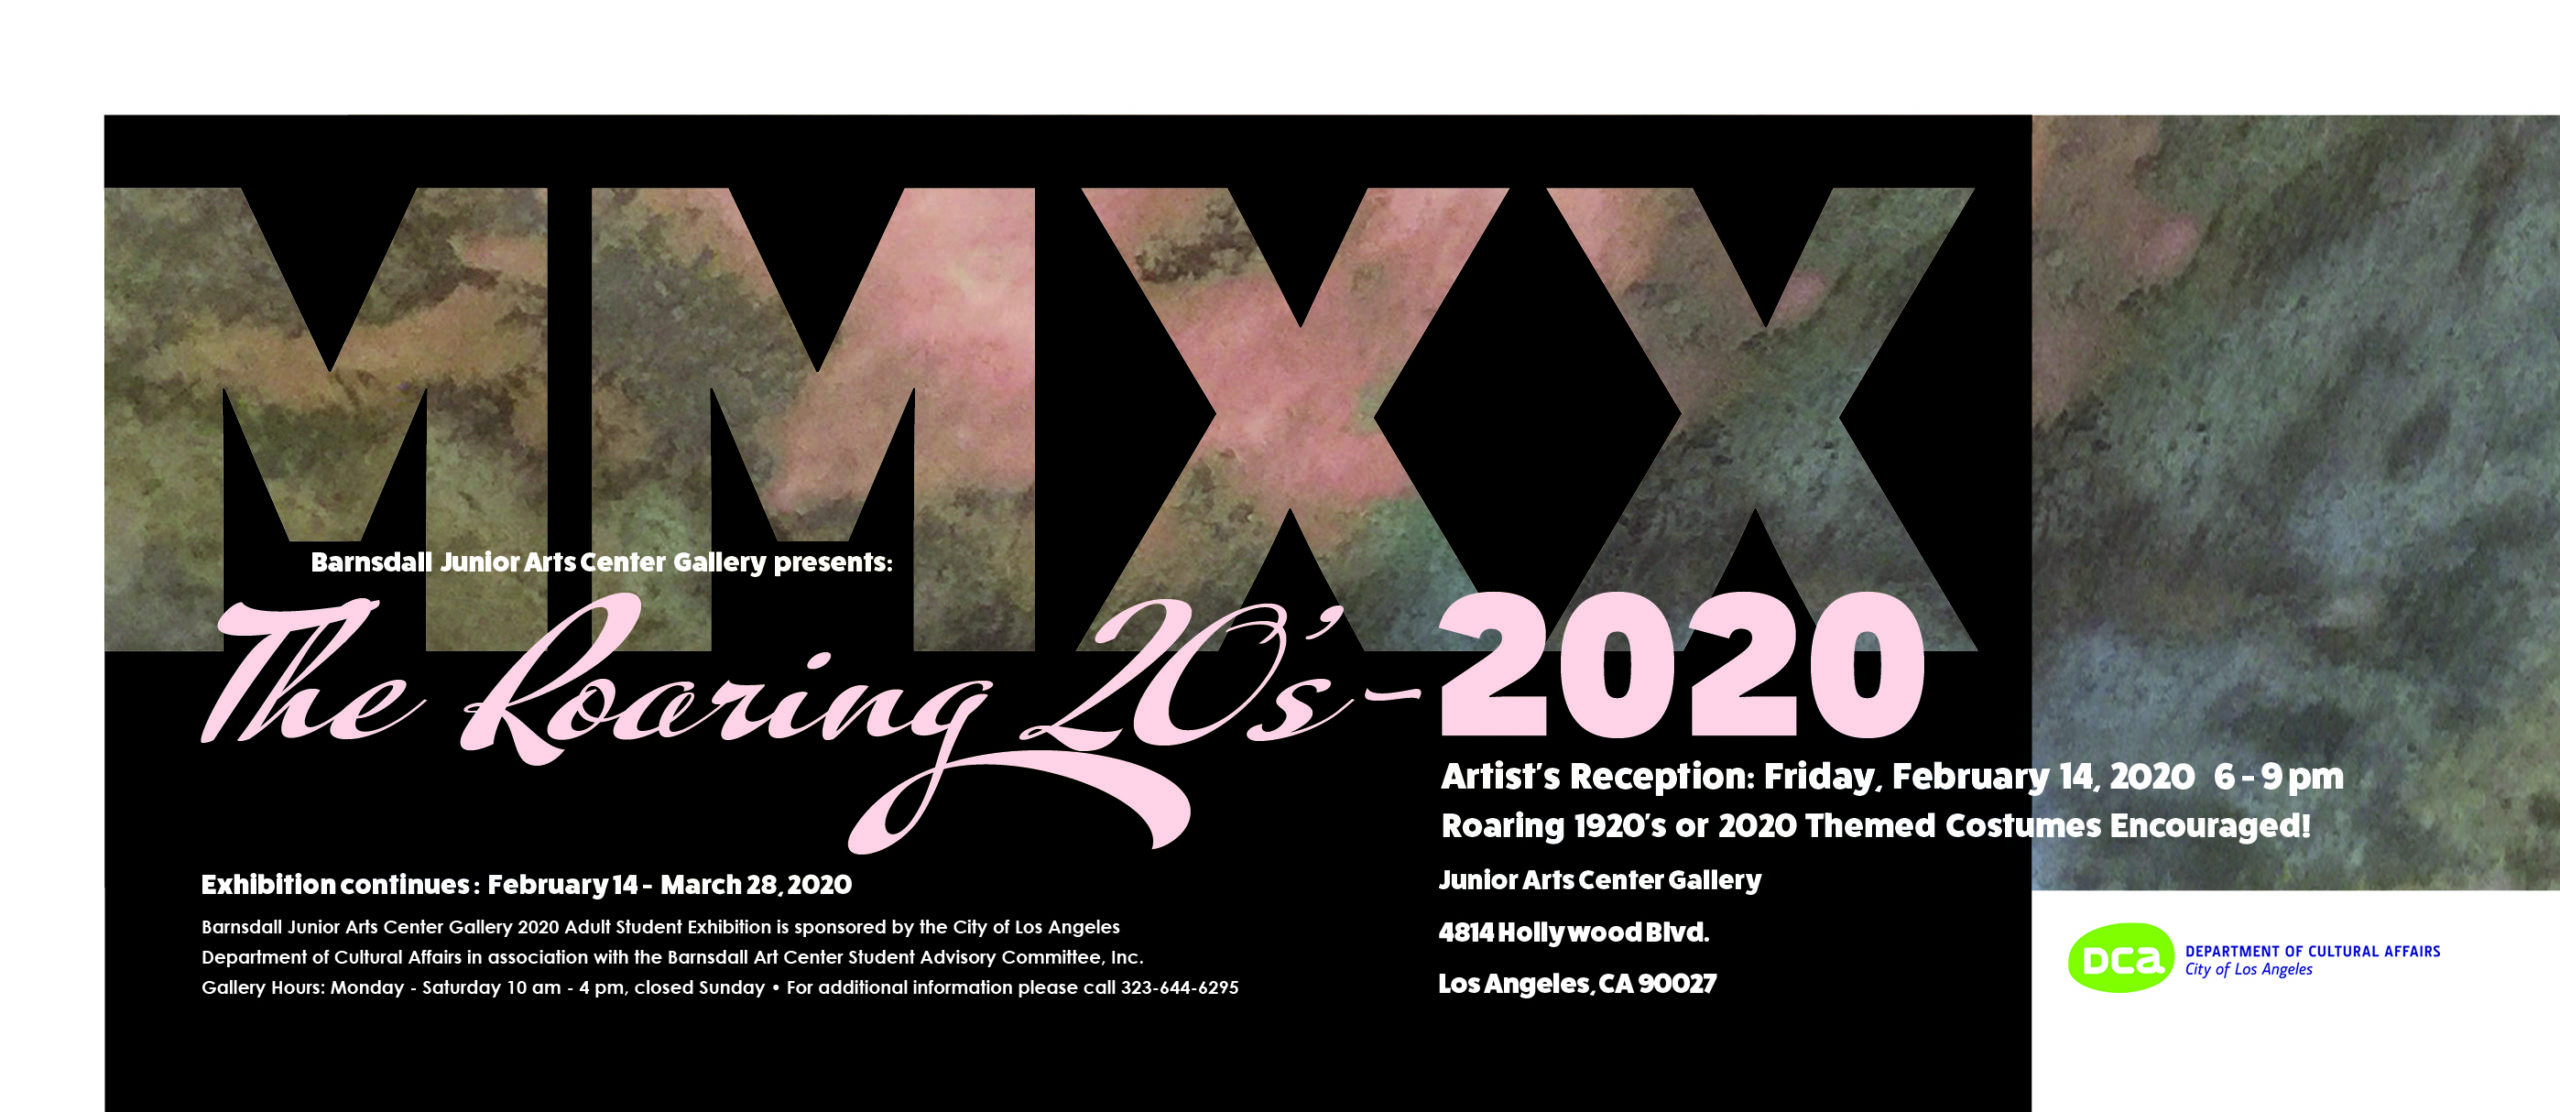 Bransdall Junior Arts Center Gallery presents <br/>“MMXX The Roaring 1920’s-2020” Adult Student Exhibition